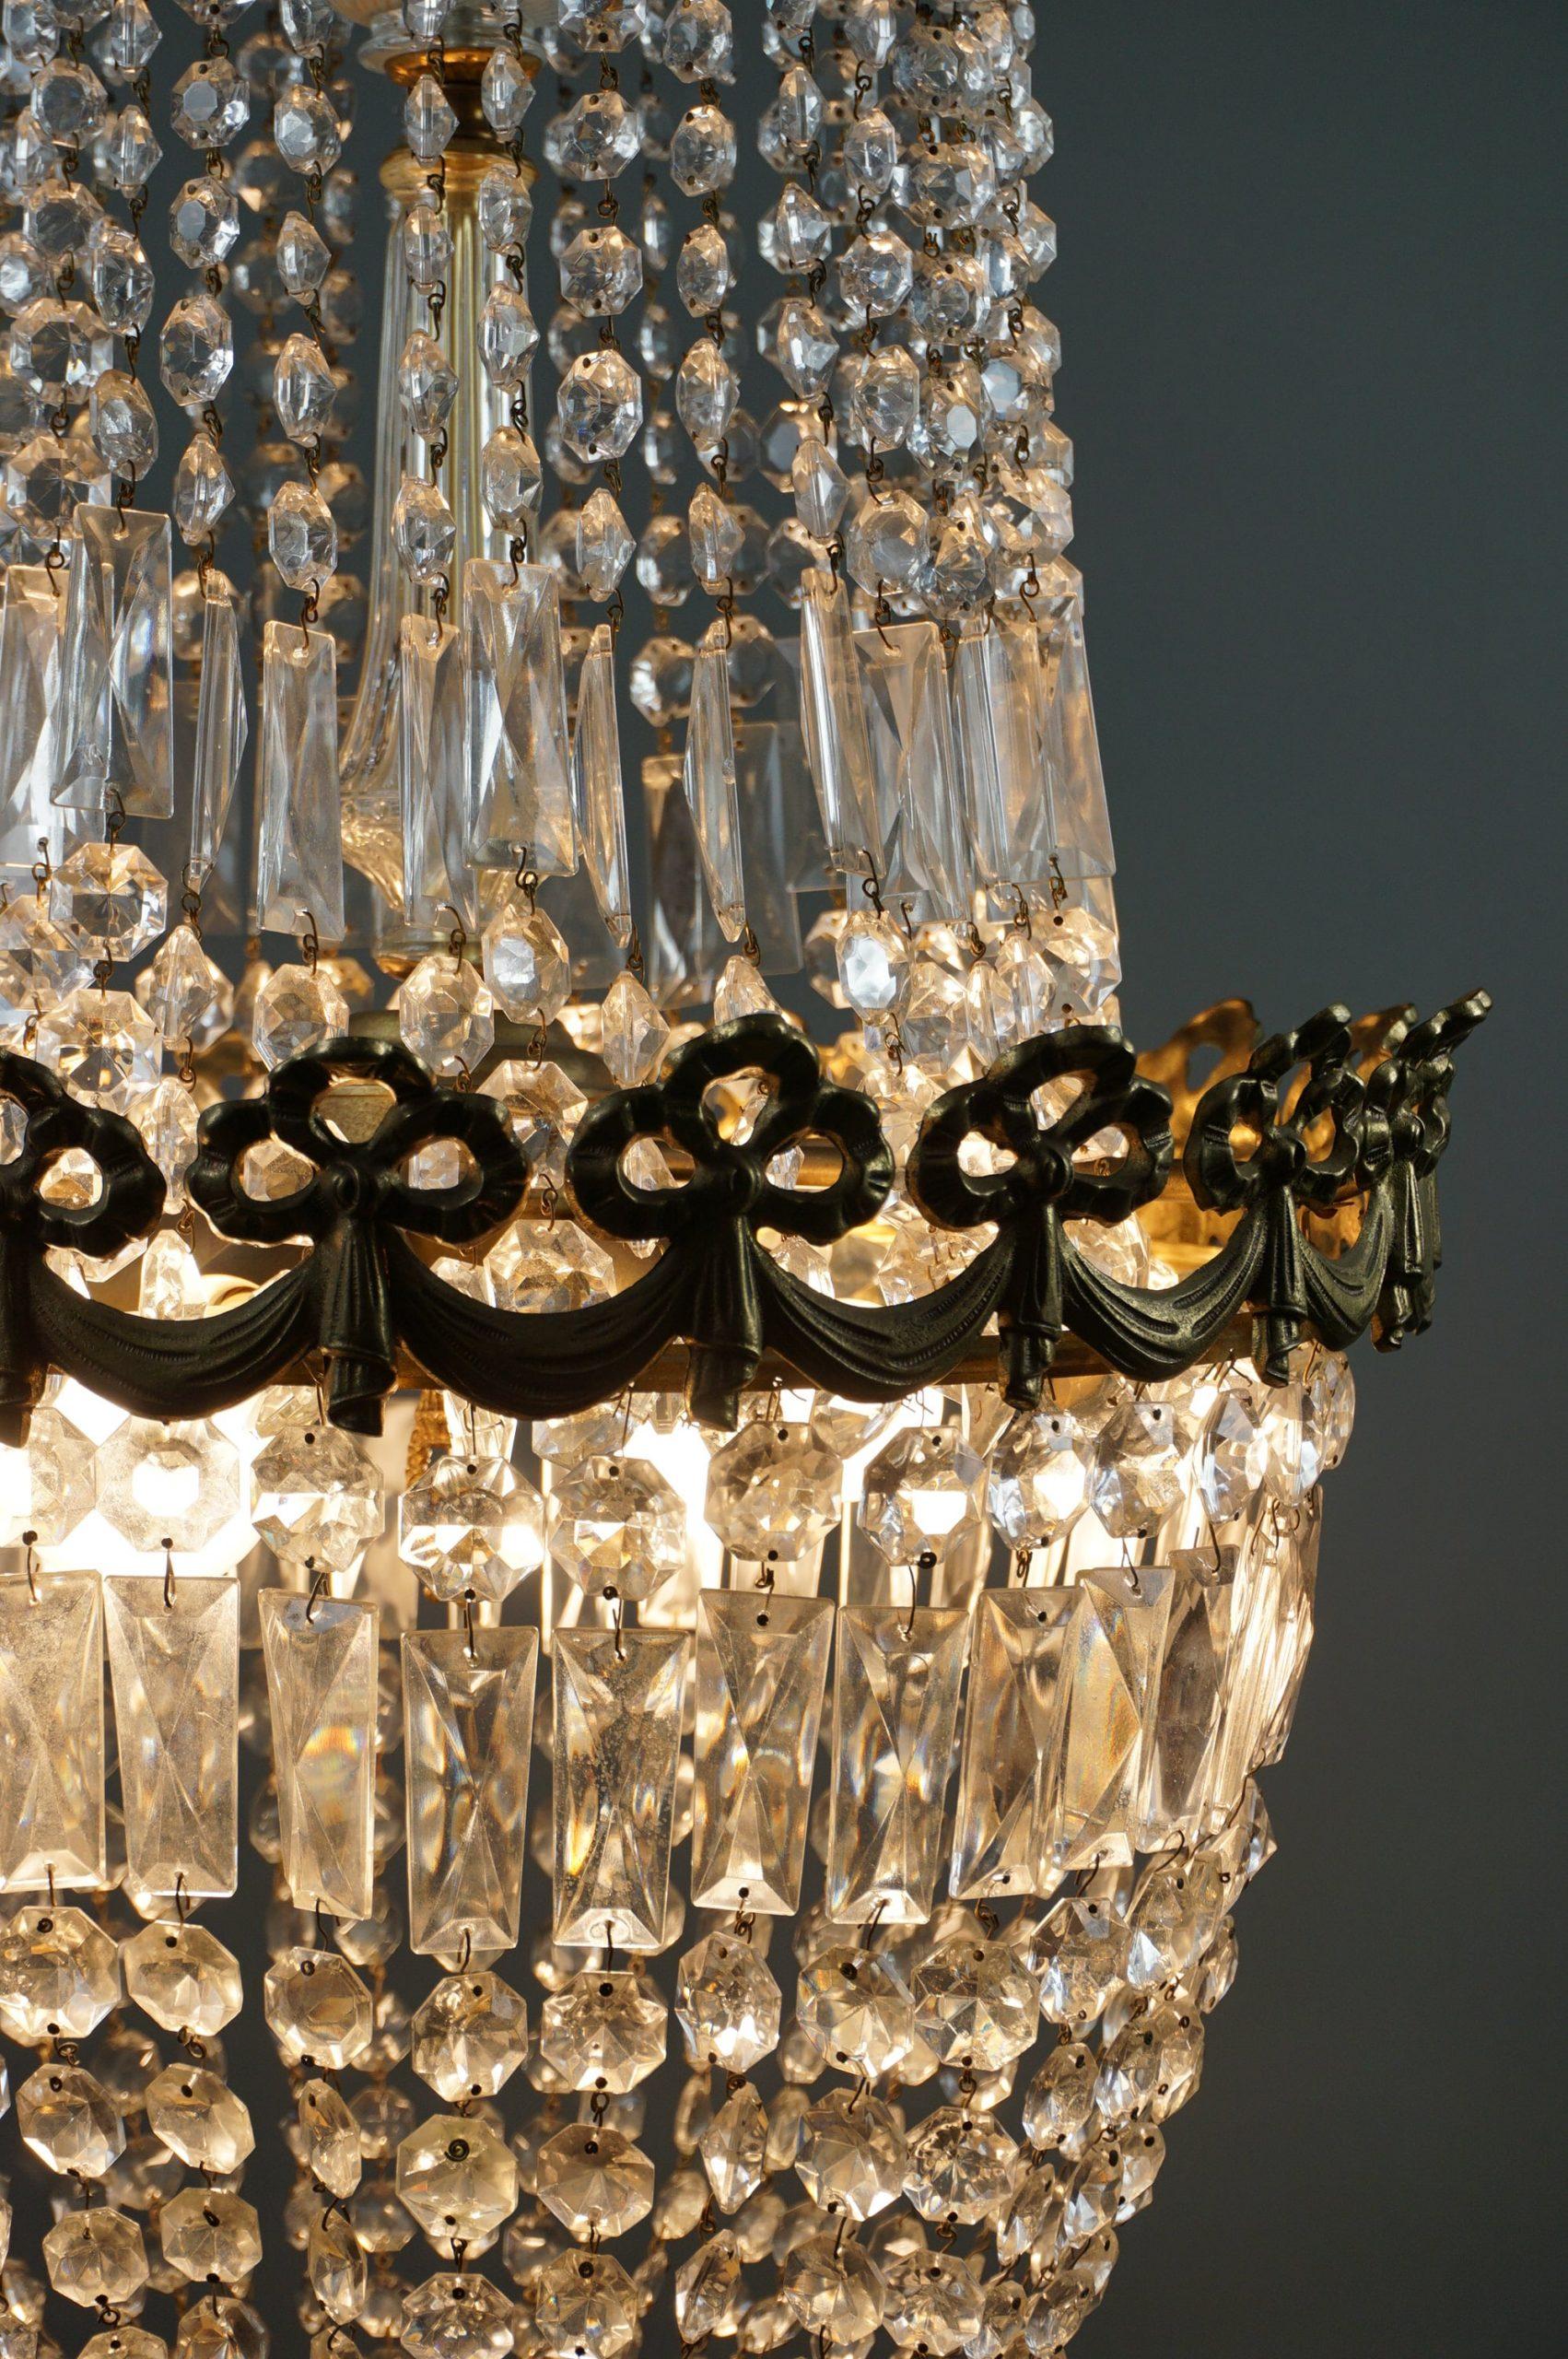 Offered is this antique chandelier full of icicles.

Insanely richly decorated classic chandelier. The crystal pendants attached to it give the chandelier its elegance.
This pocket chandelier is made of beautiful crystal and has gold edges. giving